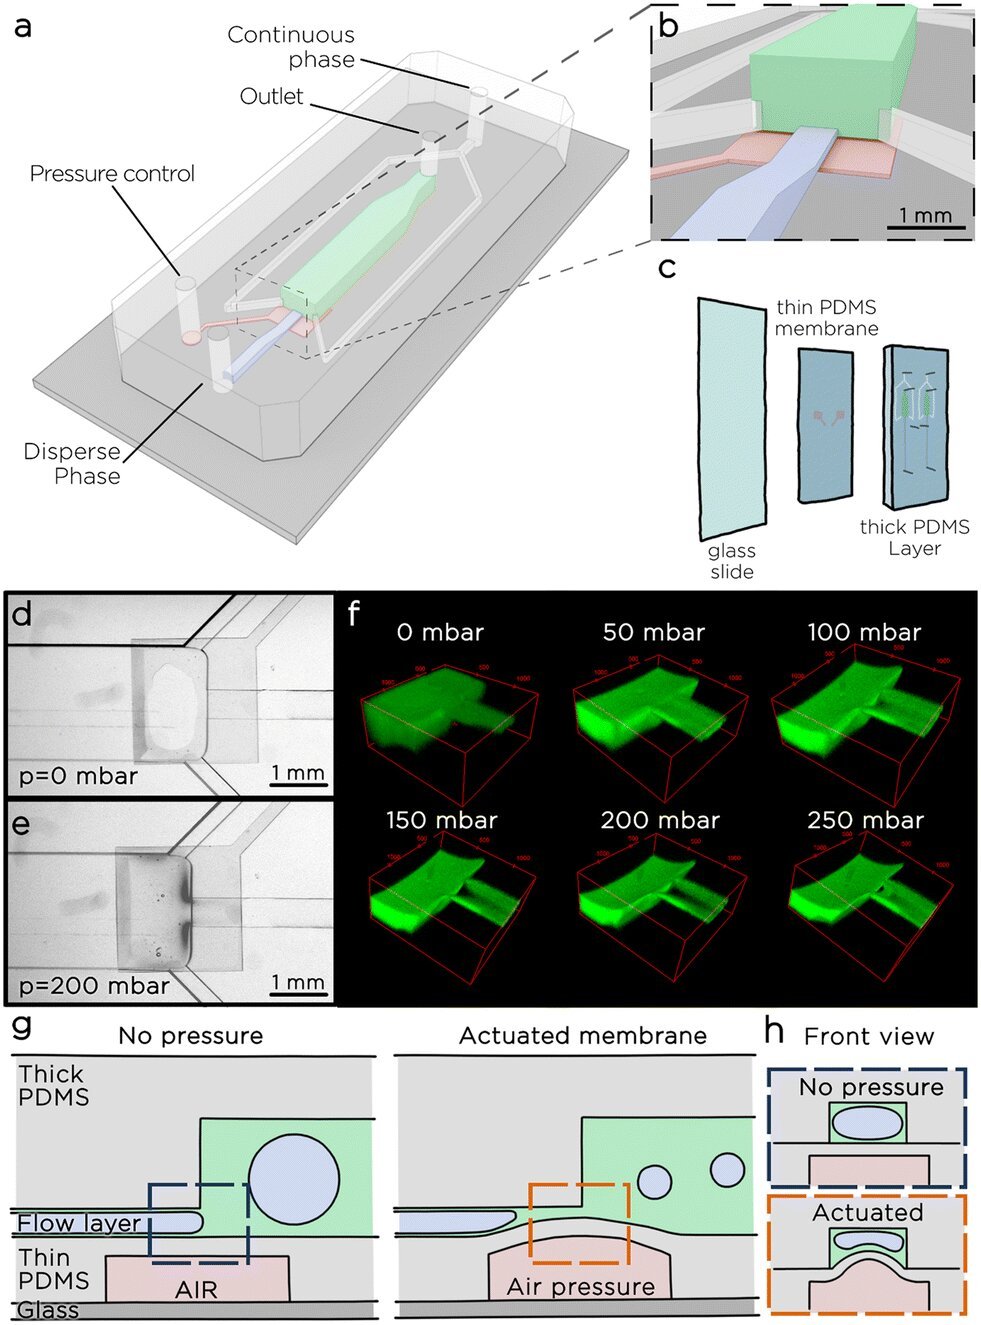 Researchers design novel microfluidic module for controlling the porosity of manufactured materials